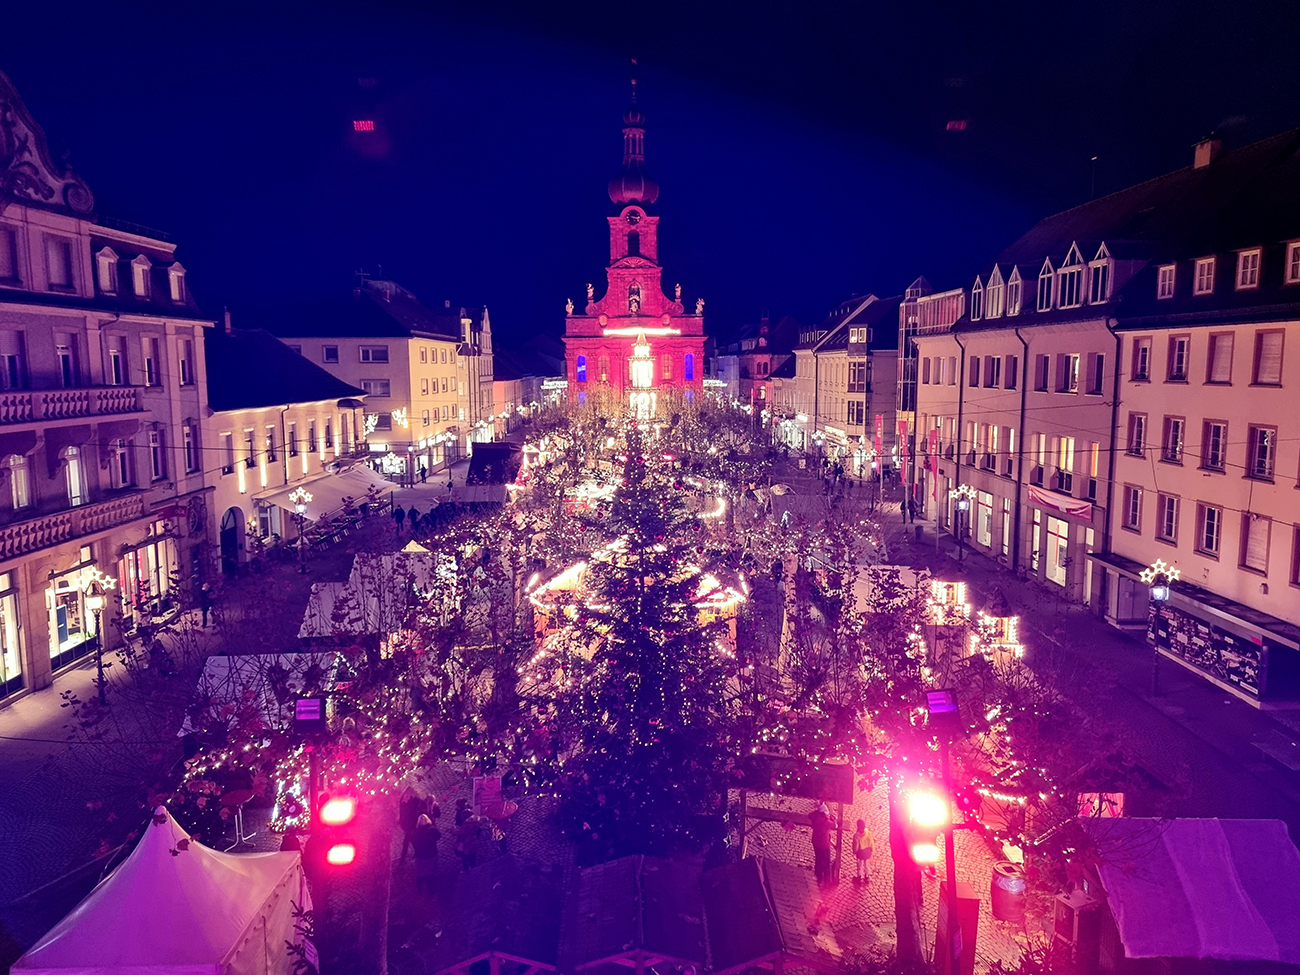 View of the Christmas market from the balcony of the town hall